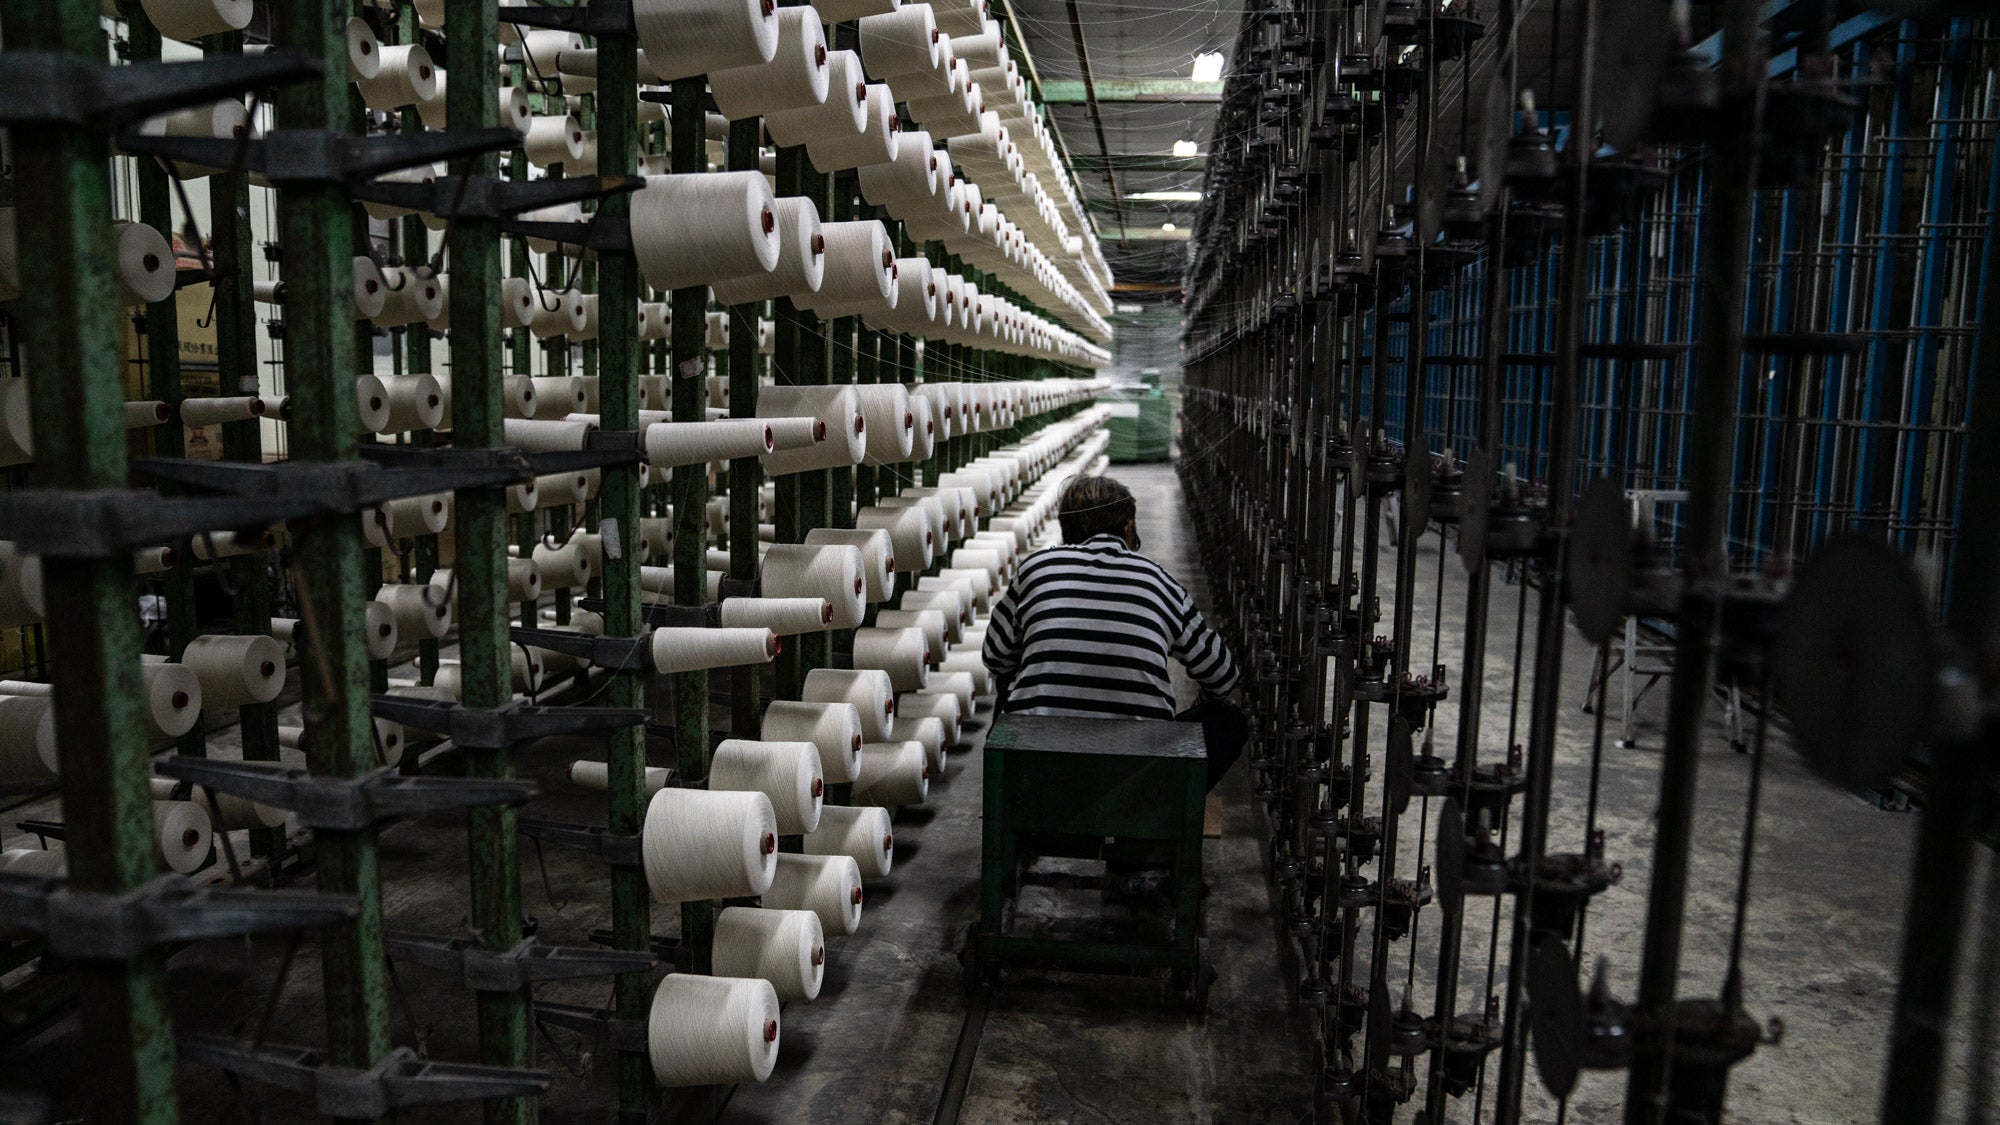 A journey to our taiwanese fabric manufacturer